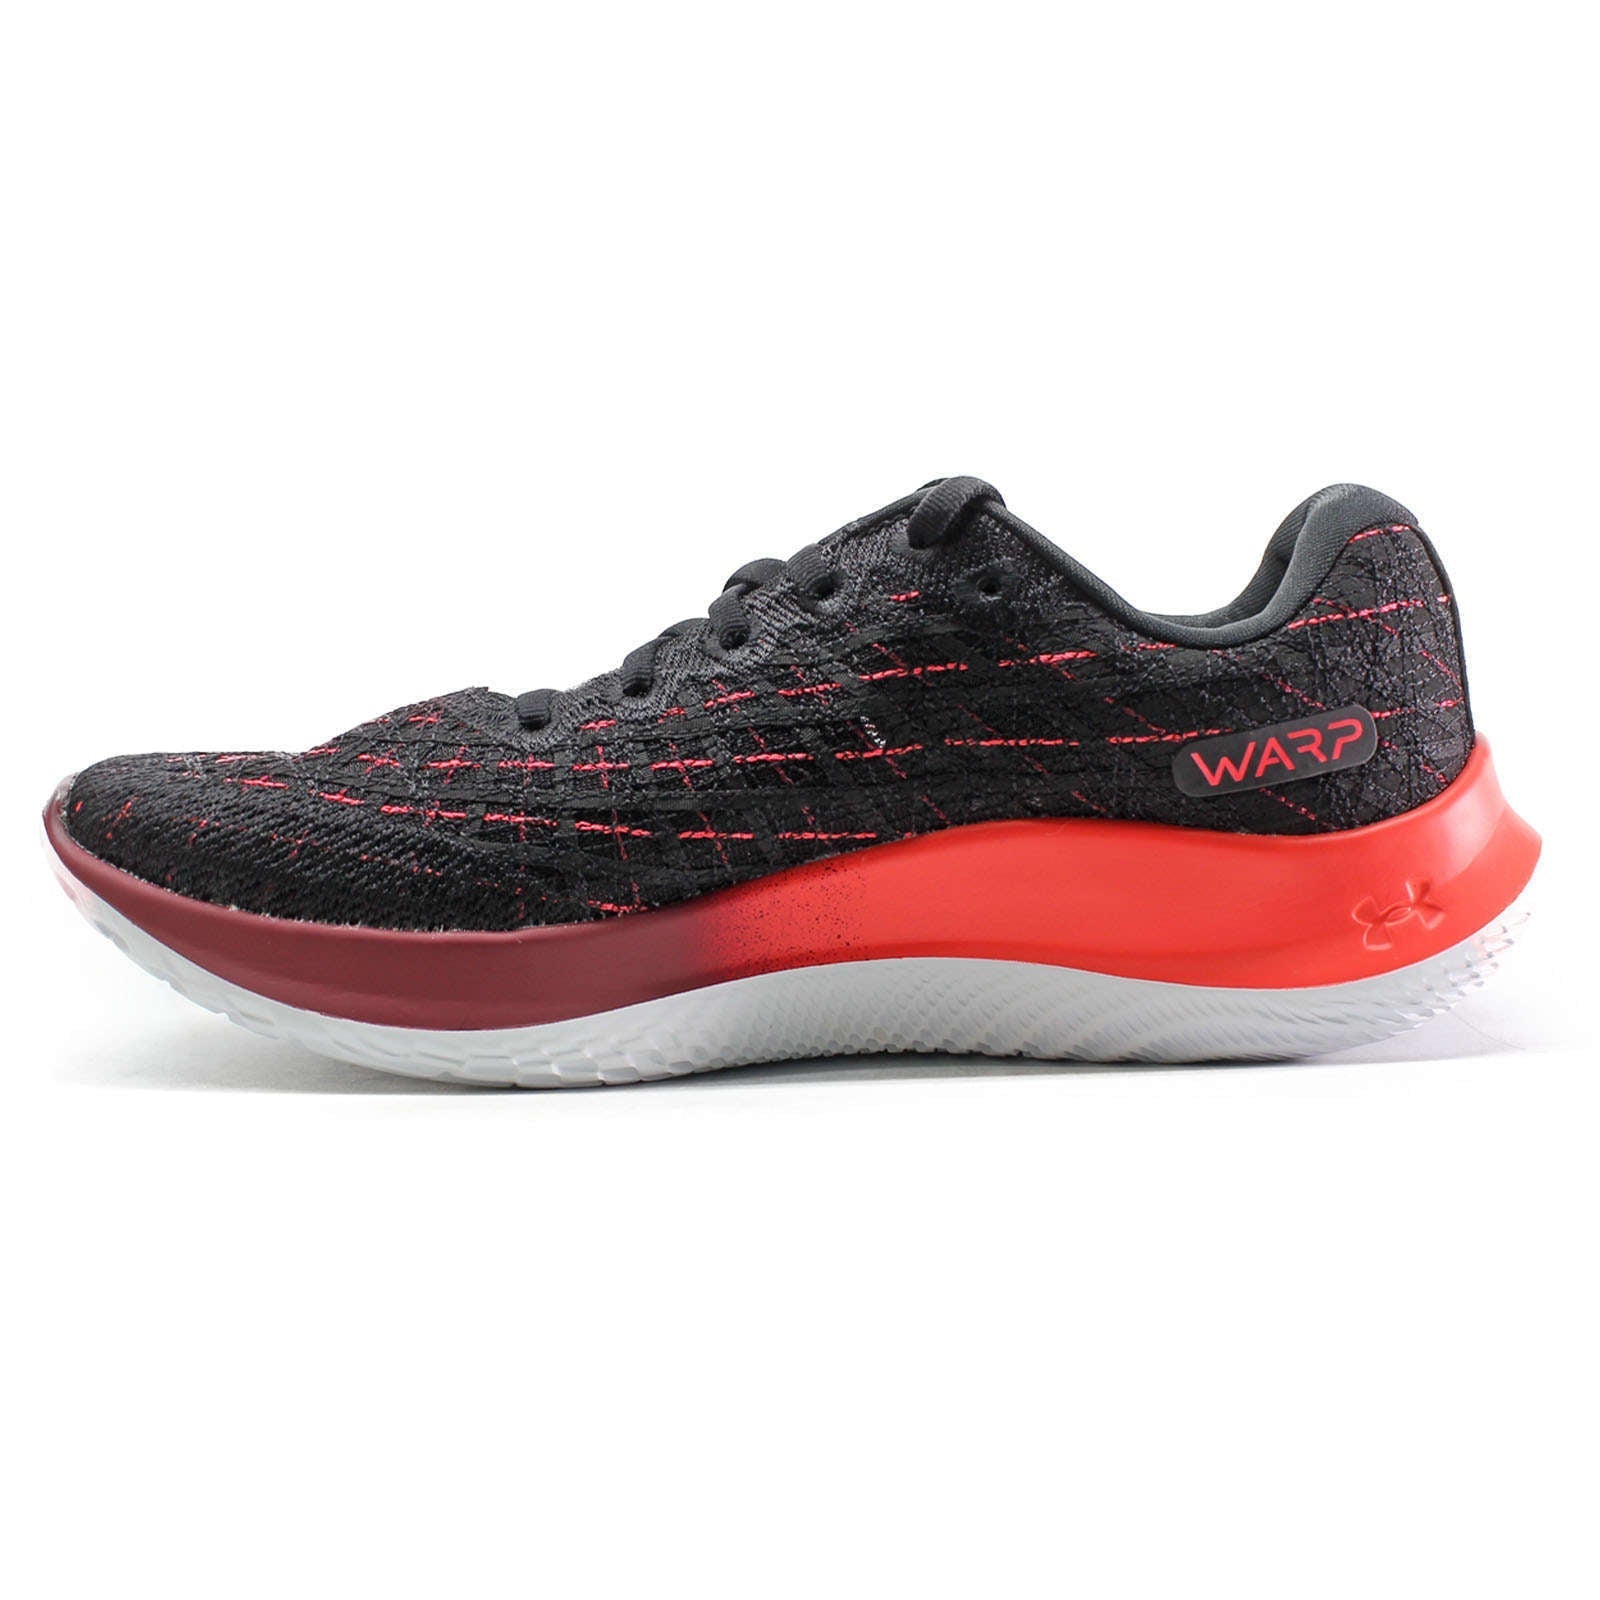 Under Armour Flow Velociti Wind CLRSFT Synthetic Textile Men's Low-Top Sneakers#color_black red